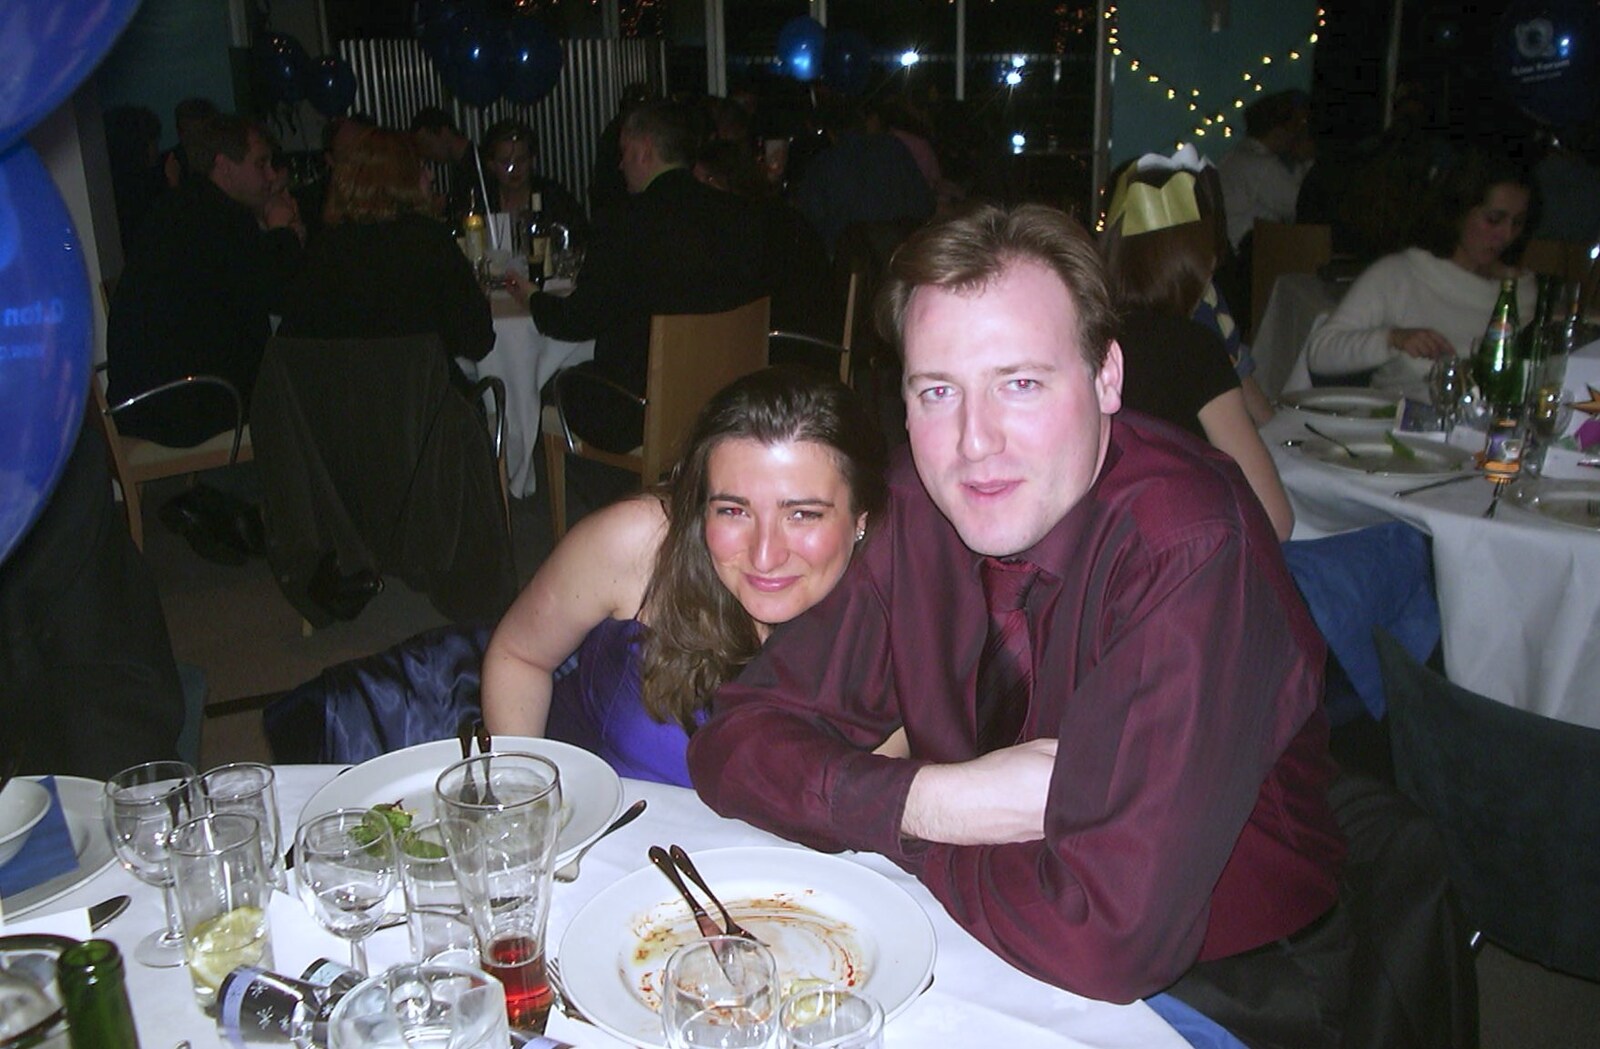 Crispin and his wife from 3G Lab Christmas Party, Q-Ton Centre, Cambridge - 20th December 2001